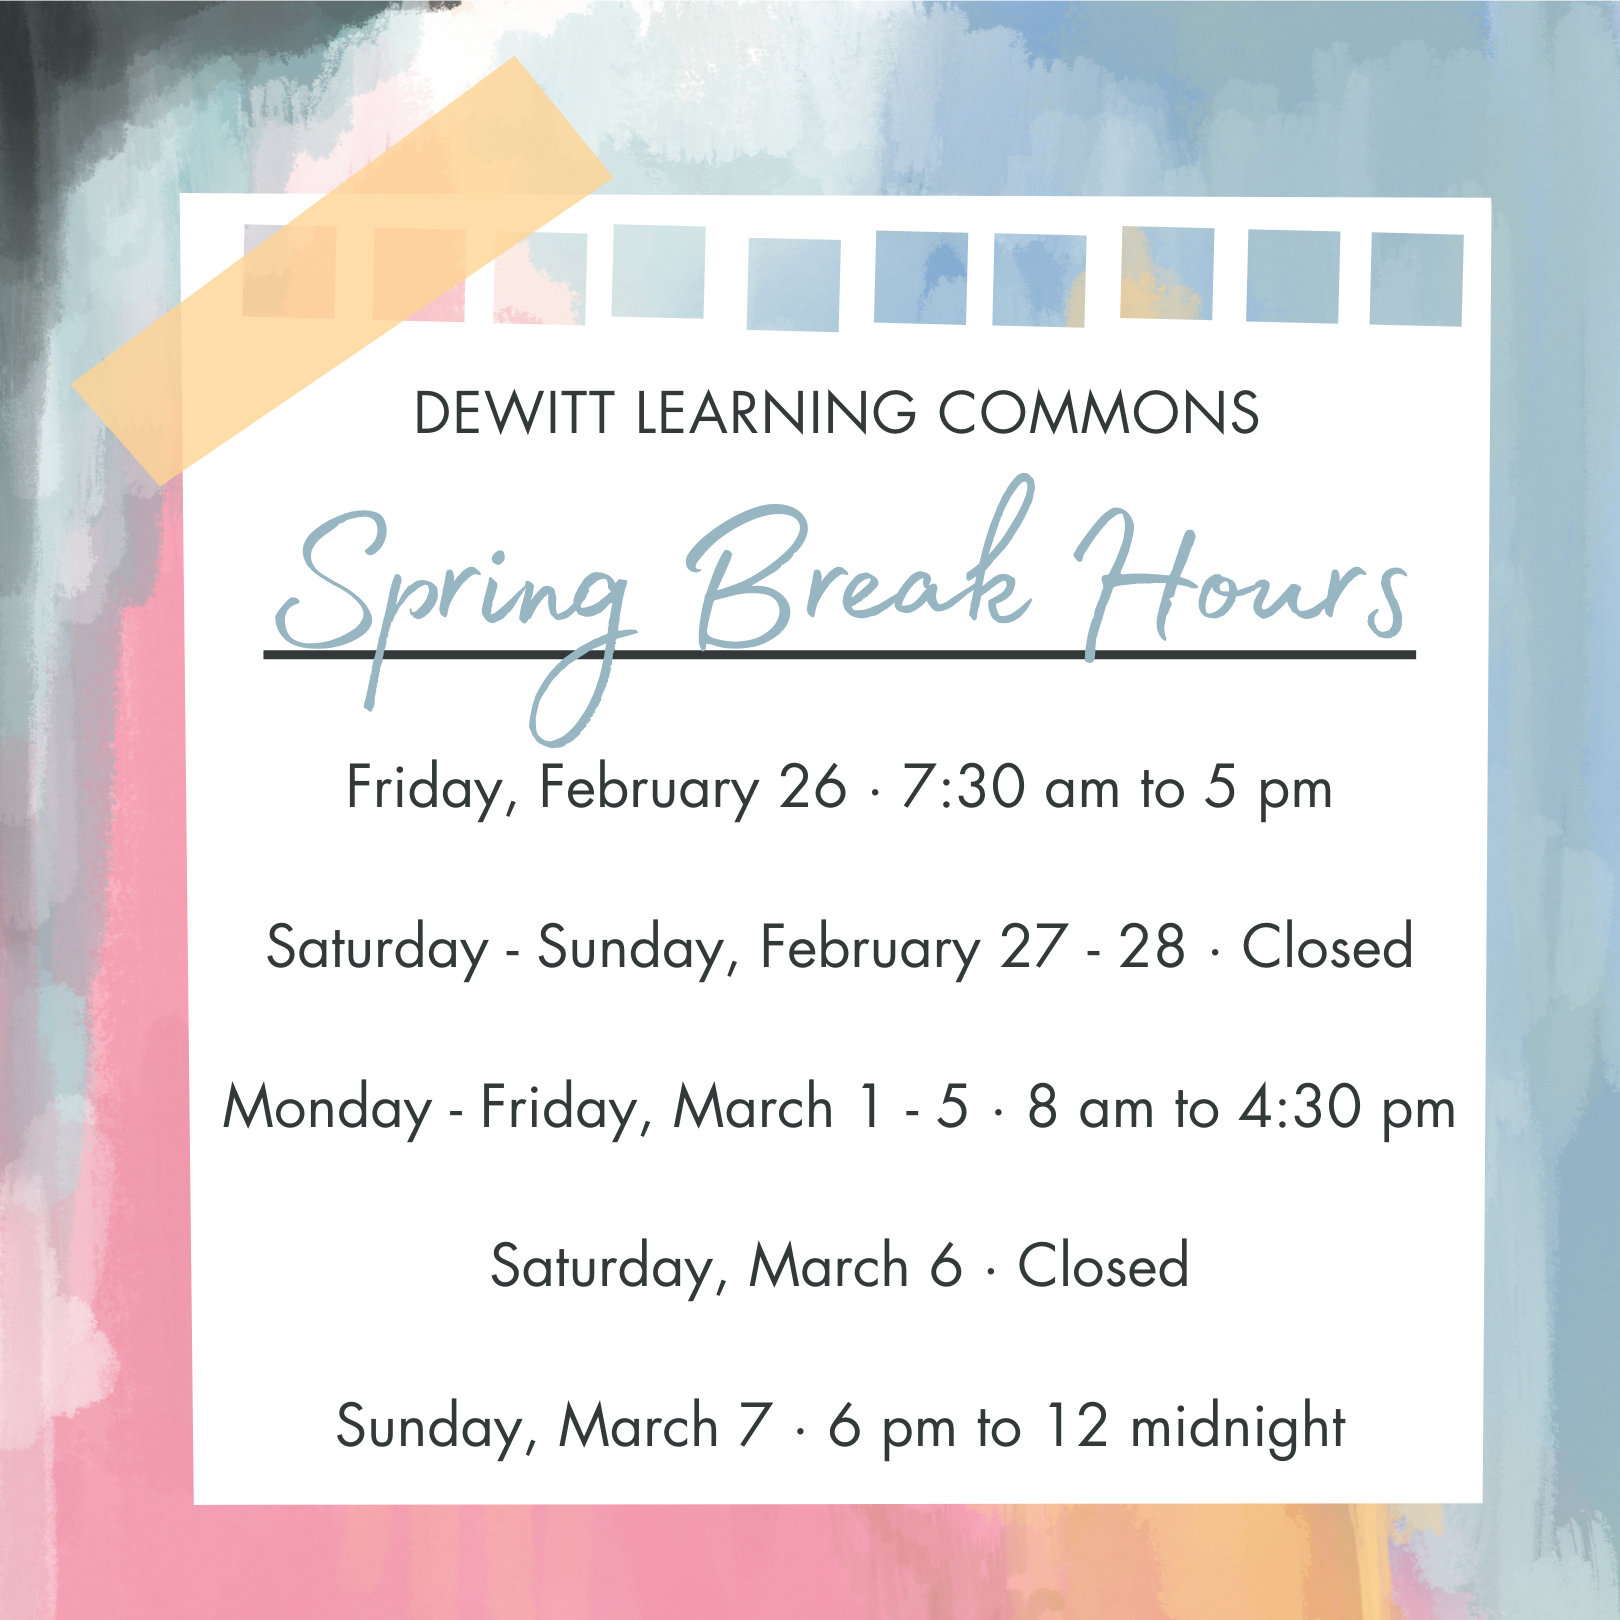 DeWitt Learning Commons Spring Break Hours: Friday, February 26 · 7:30 am to 5 pm;  Saturday - Sunday, February 27 - 28 · Closed;  Monday - Friday, March 1 - 5 · 8 am to 4:30 pm;  Saturday, March 6 · Closed;  Sunday, March 7 · 6 pm to 12 midnight